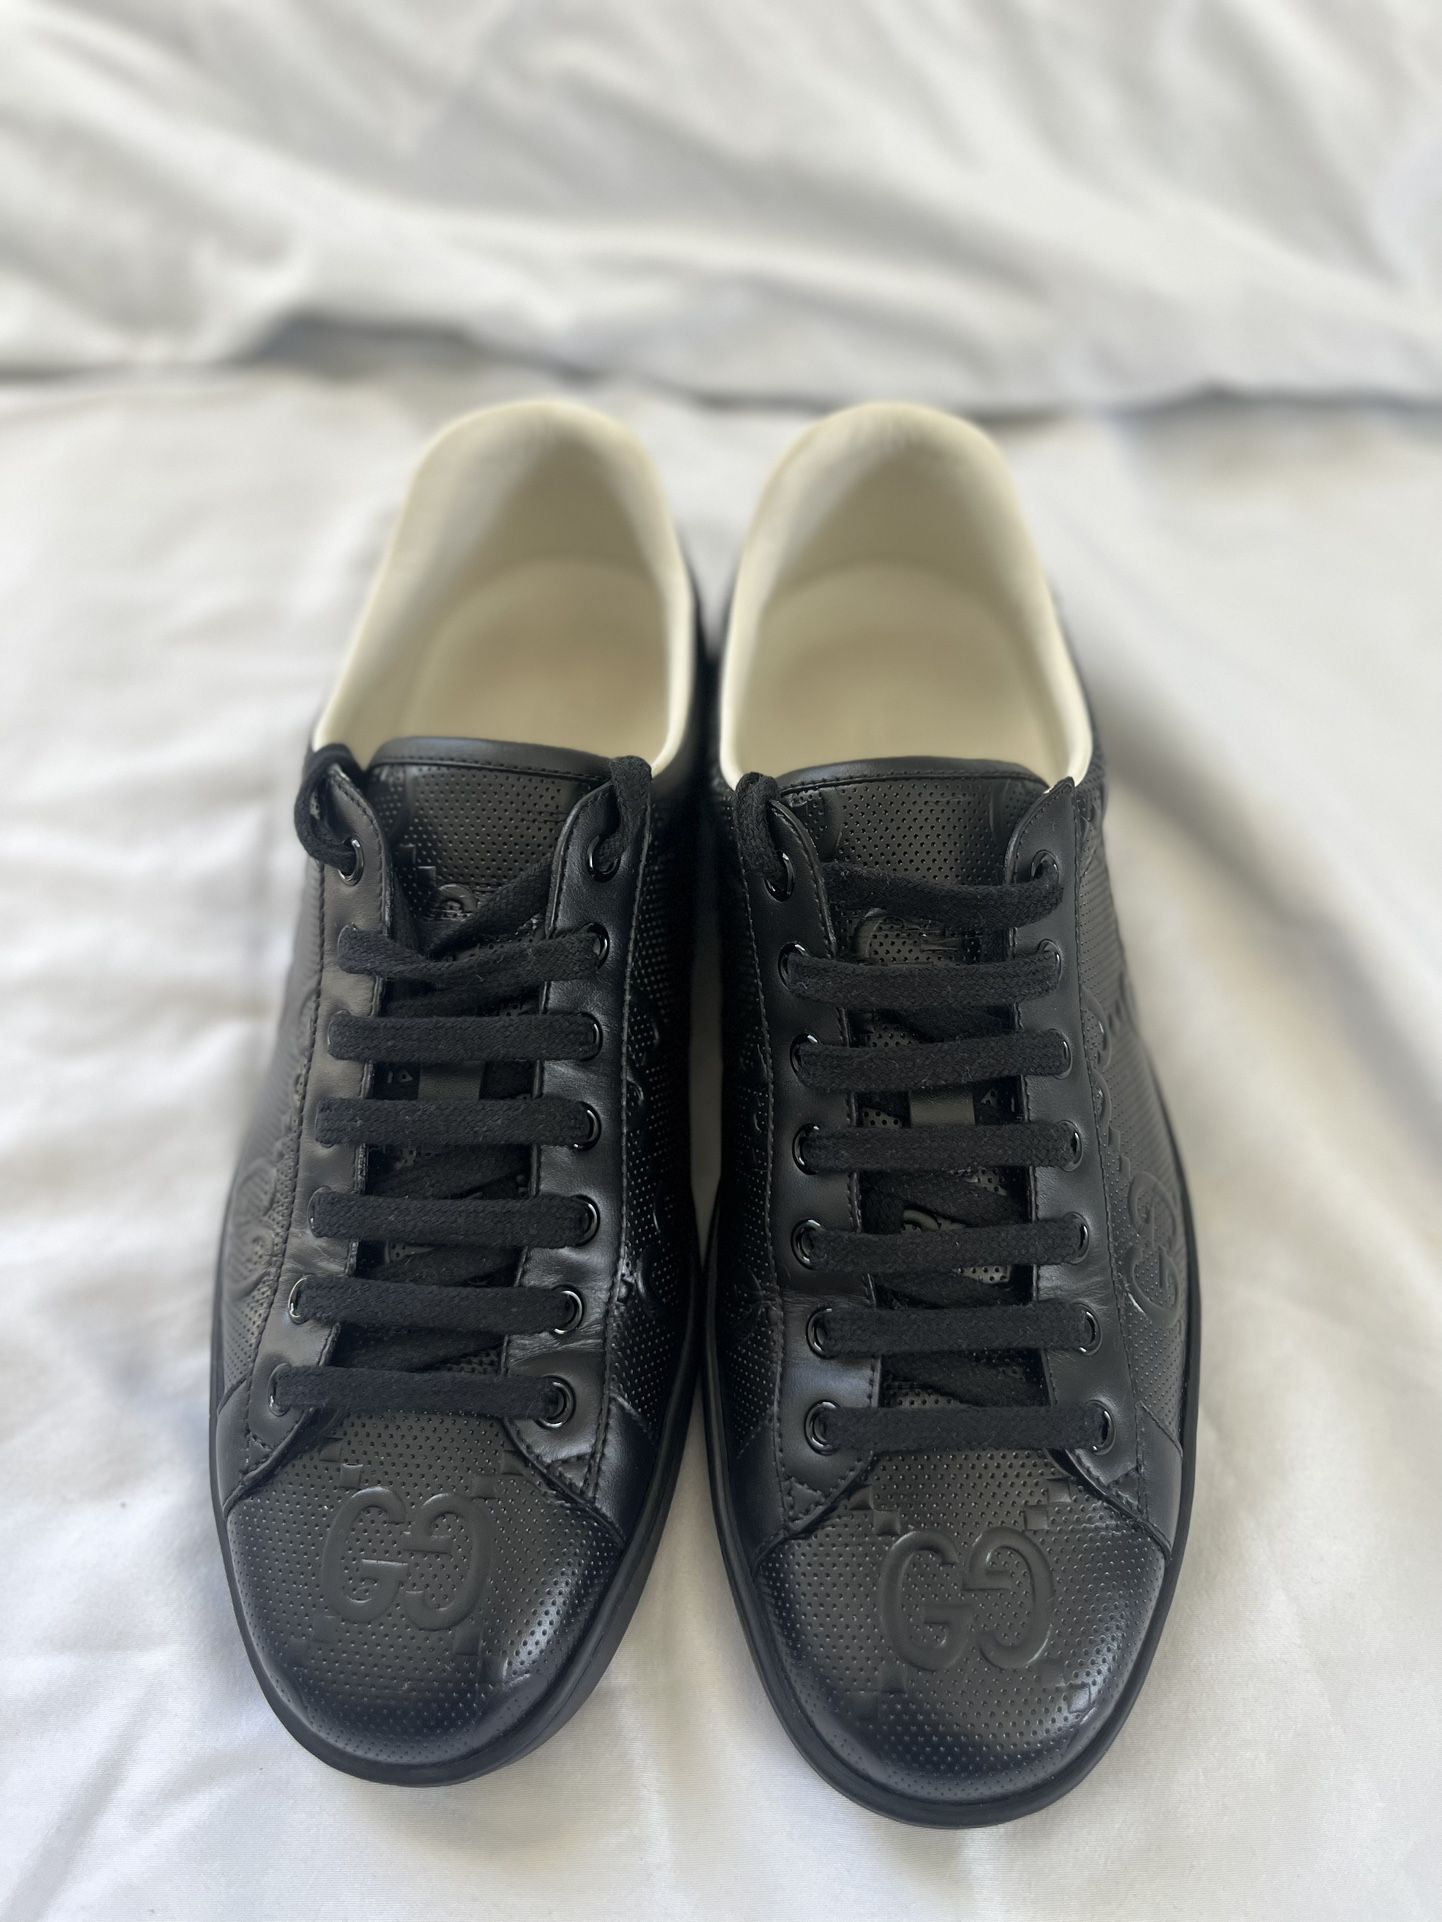 MEN'S ACE GG EMBOSSED SNEAKER ,BLACK GUCCI , SIZE 8.5